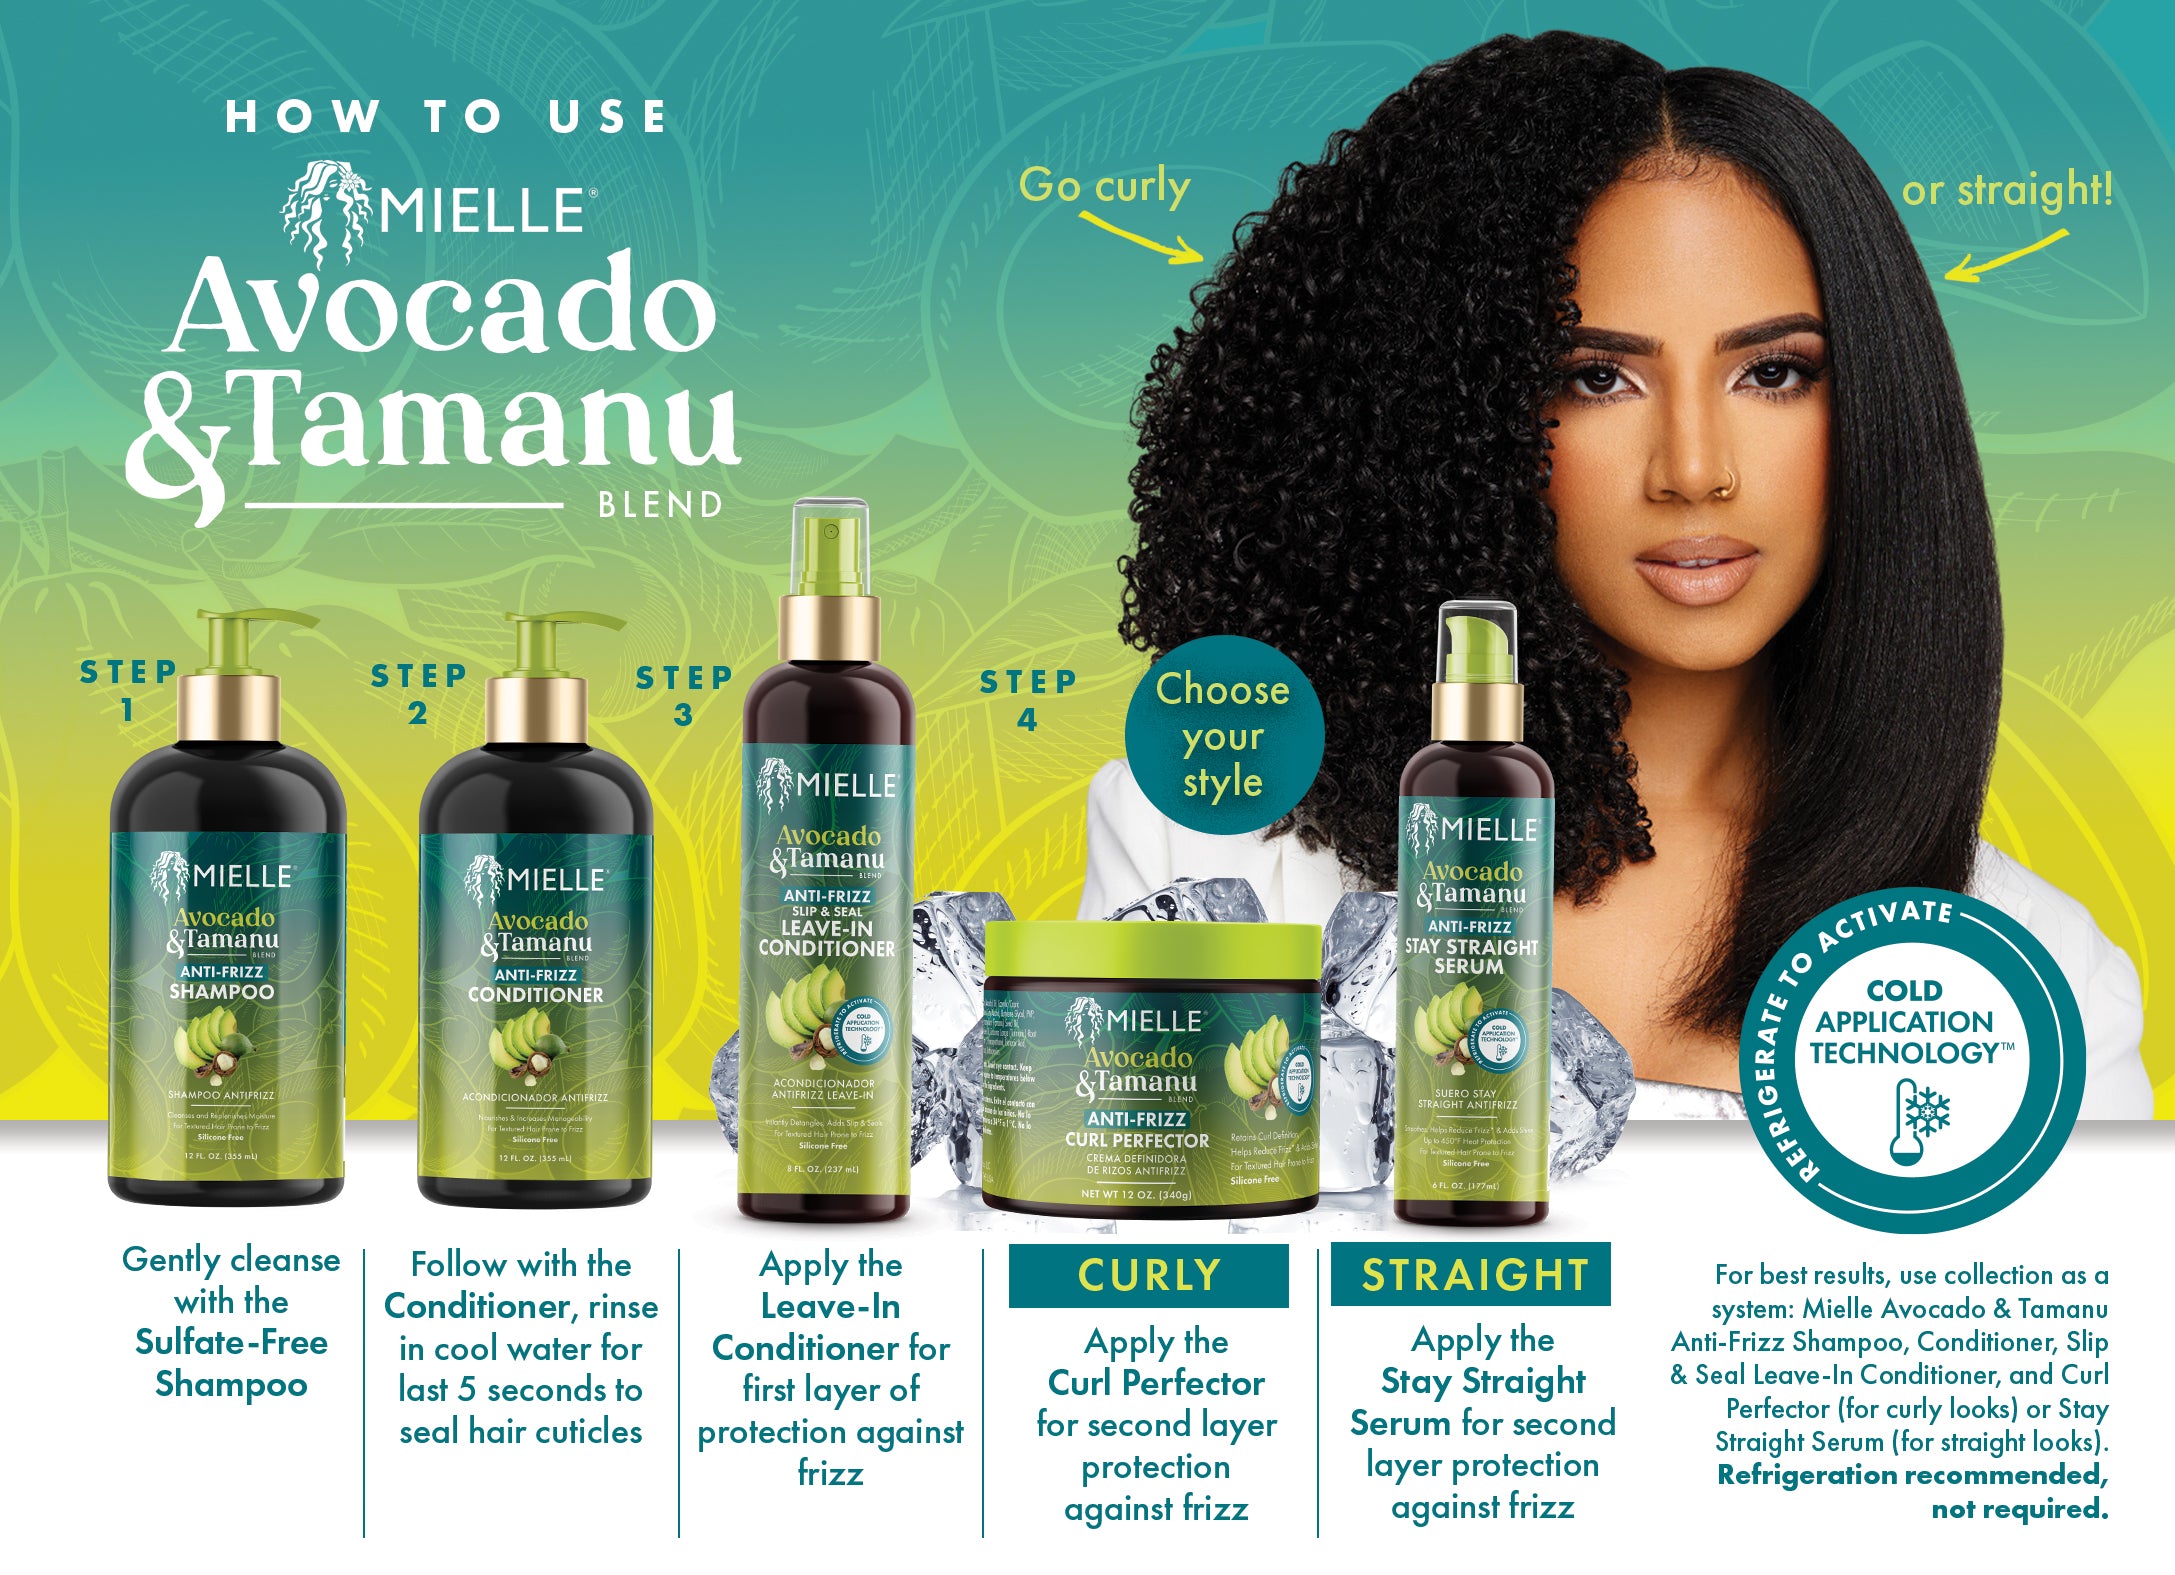 Avocado and Tamanu hair kit to either curl or straighten your hairs and explaining all the procedure and step of using it.